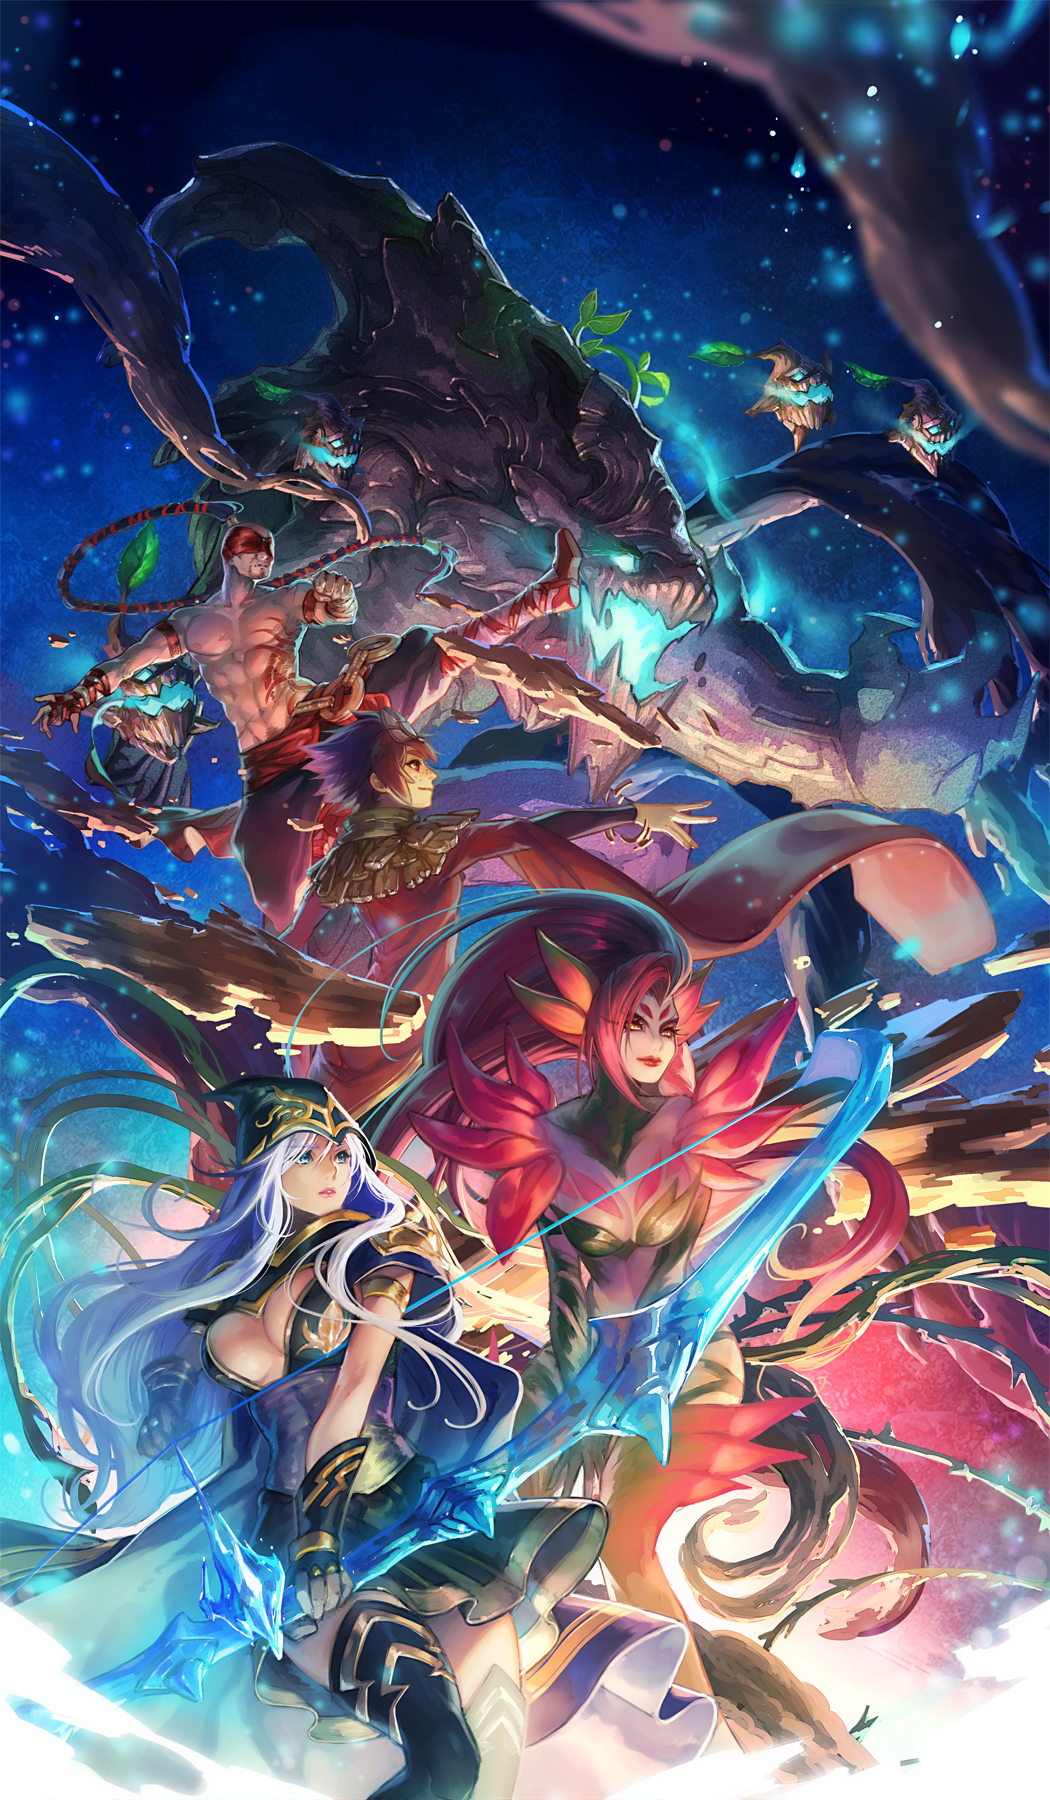 2boys 3girls armband armlet arrow ashe_(league_of_legends) bandage bandaged_hands bandaged_leg bandages black_gloves black_hair blindfold blue_eyes bow_(weapon) bracelet brown_hair cape clenched_hand eyebrows_visible_through_hair facial_hair fingerless_gloves flower gloves glowing glowing_eyes glowing_mouth highres holding holding_arrow holding_bow_(weapon) holding_weapon hood hood_up ice jewelry kicking league_of_legends lee_sin lens_flare lipstick long_hair makeup maokai moss multiple_boys multiple_girls muscle open_mouth parted_lips pink_hair pink_lips plant ponytail red_eyes red_lips red_lipstick rock sapling shirtless short_hair silver_hair skirt smile smoke taliyah tamtam_ex tattoo thighhighs thorns transparent vines weapon white_hair yellow_eyes zyra